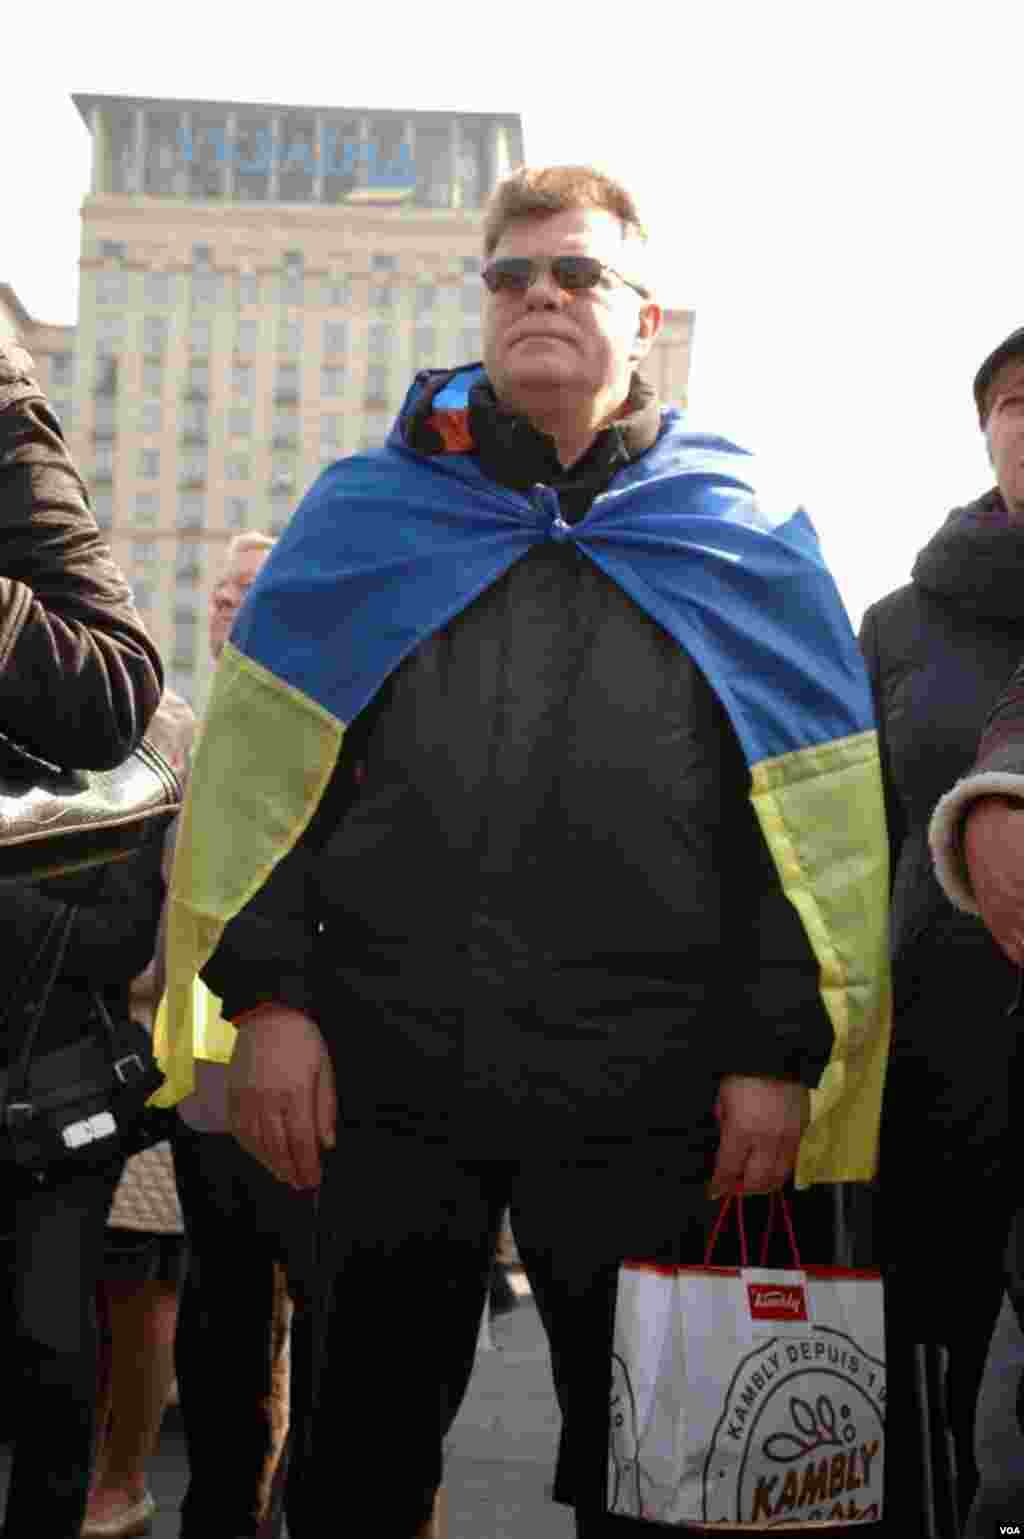 A man wearing a Ukranian flag listens to speakers at a unity rally in Maidan, central Kyiv. (Steve Herman/VOA)